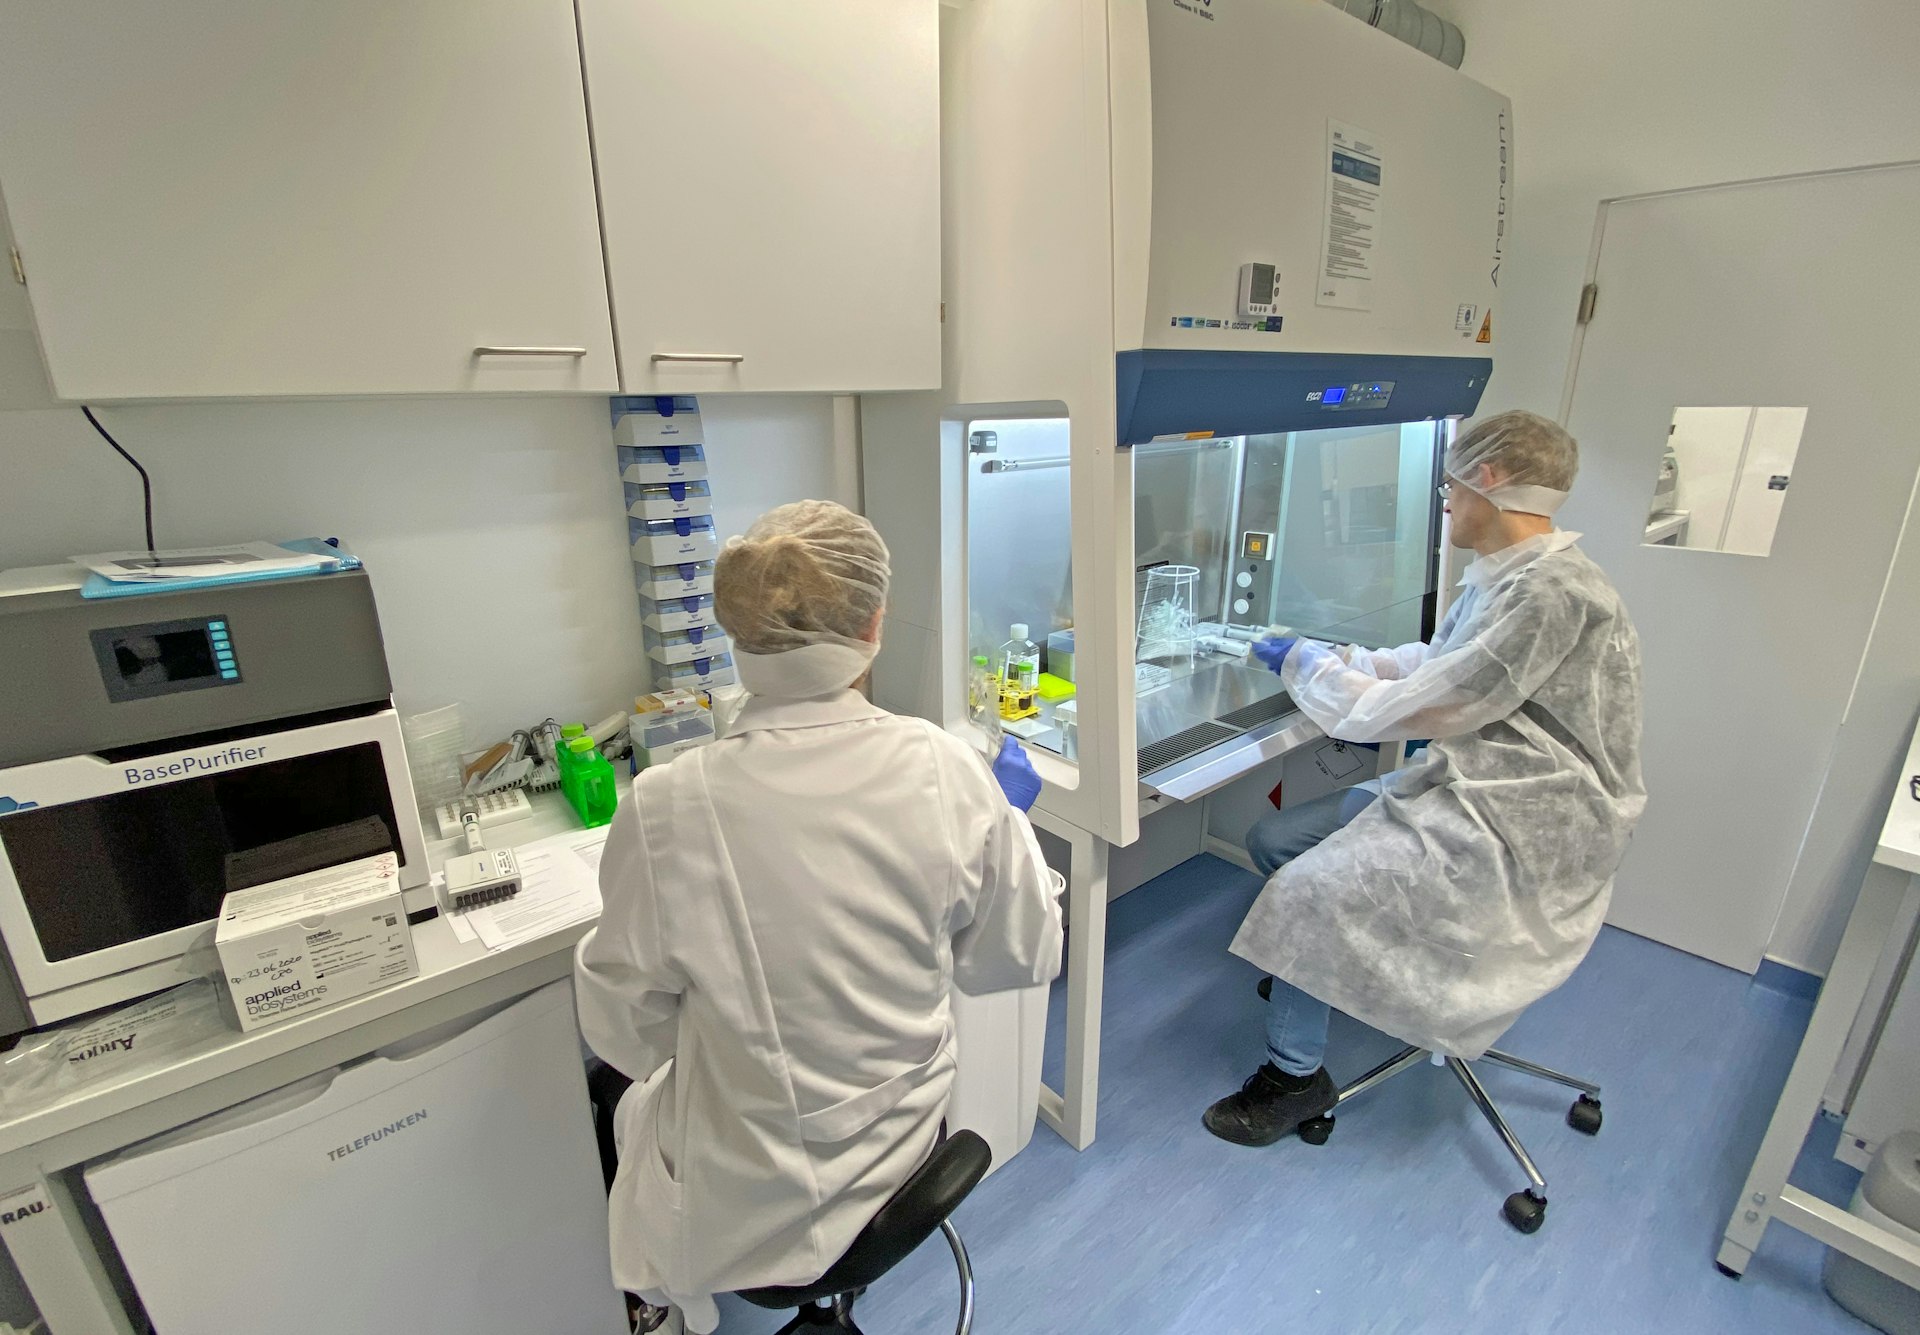 Doctors examine covid tests in a medical facility